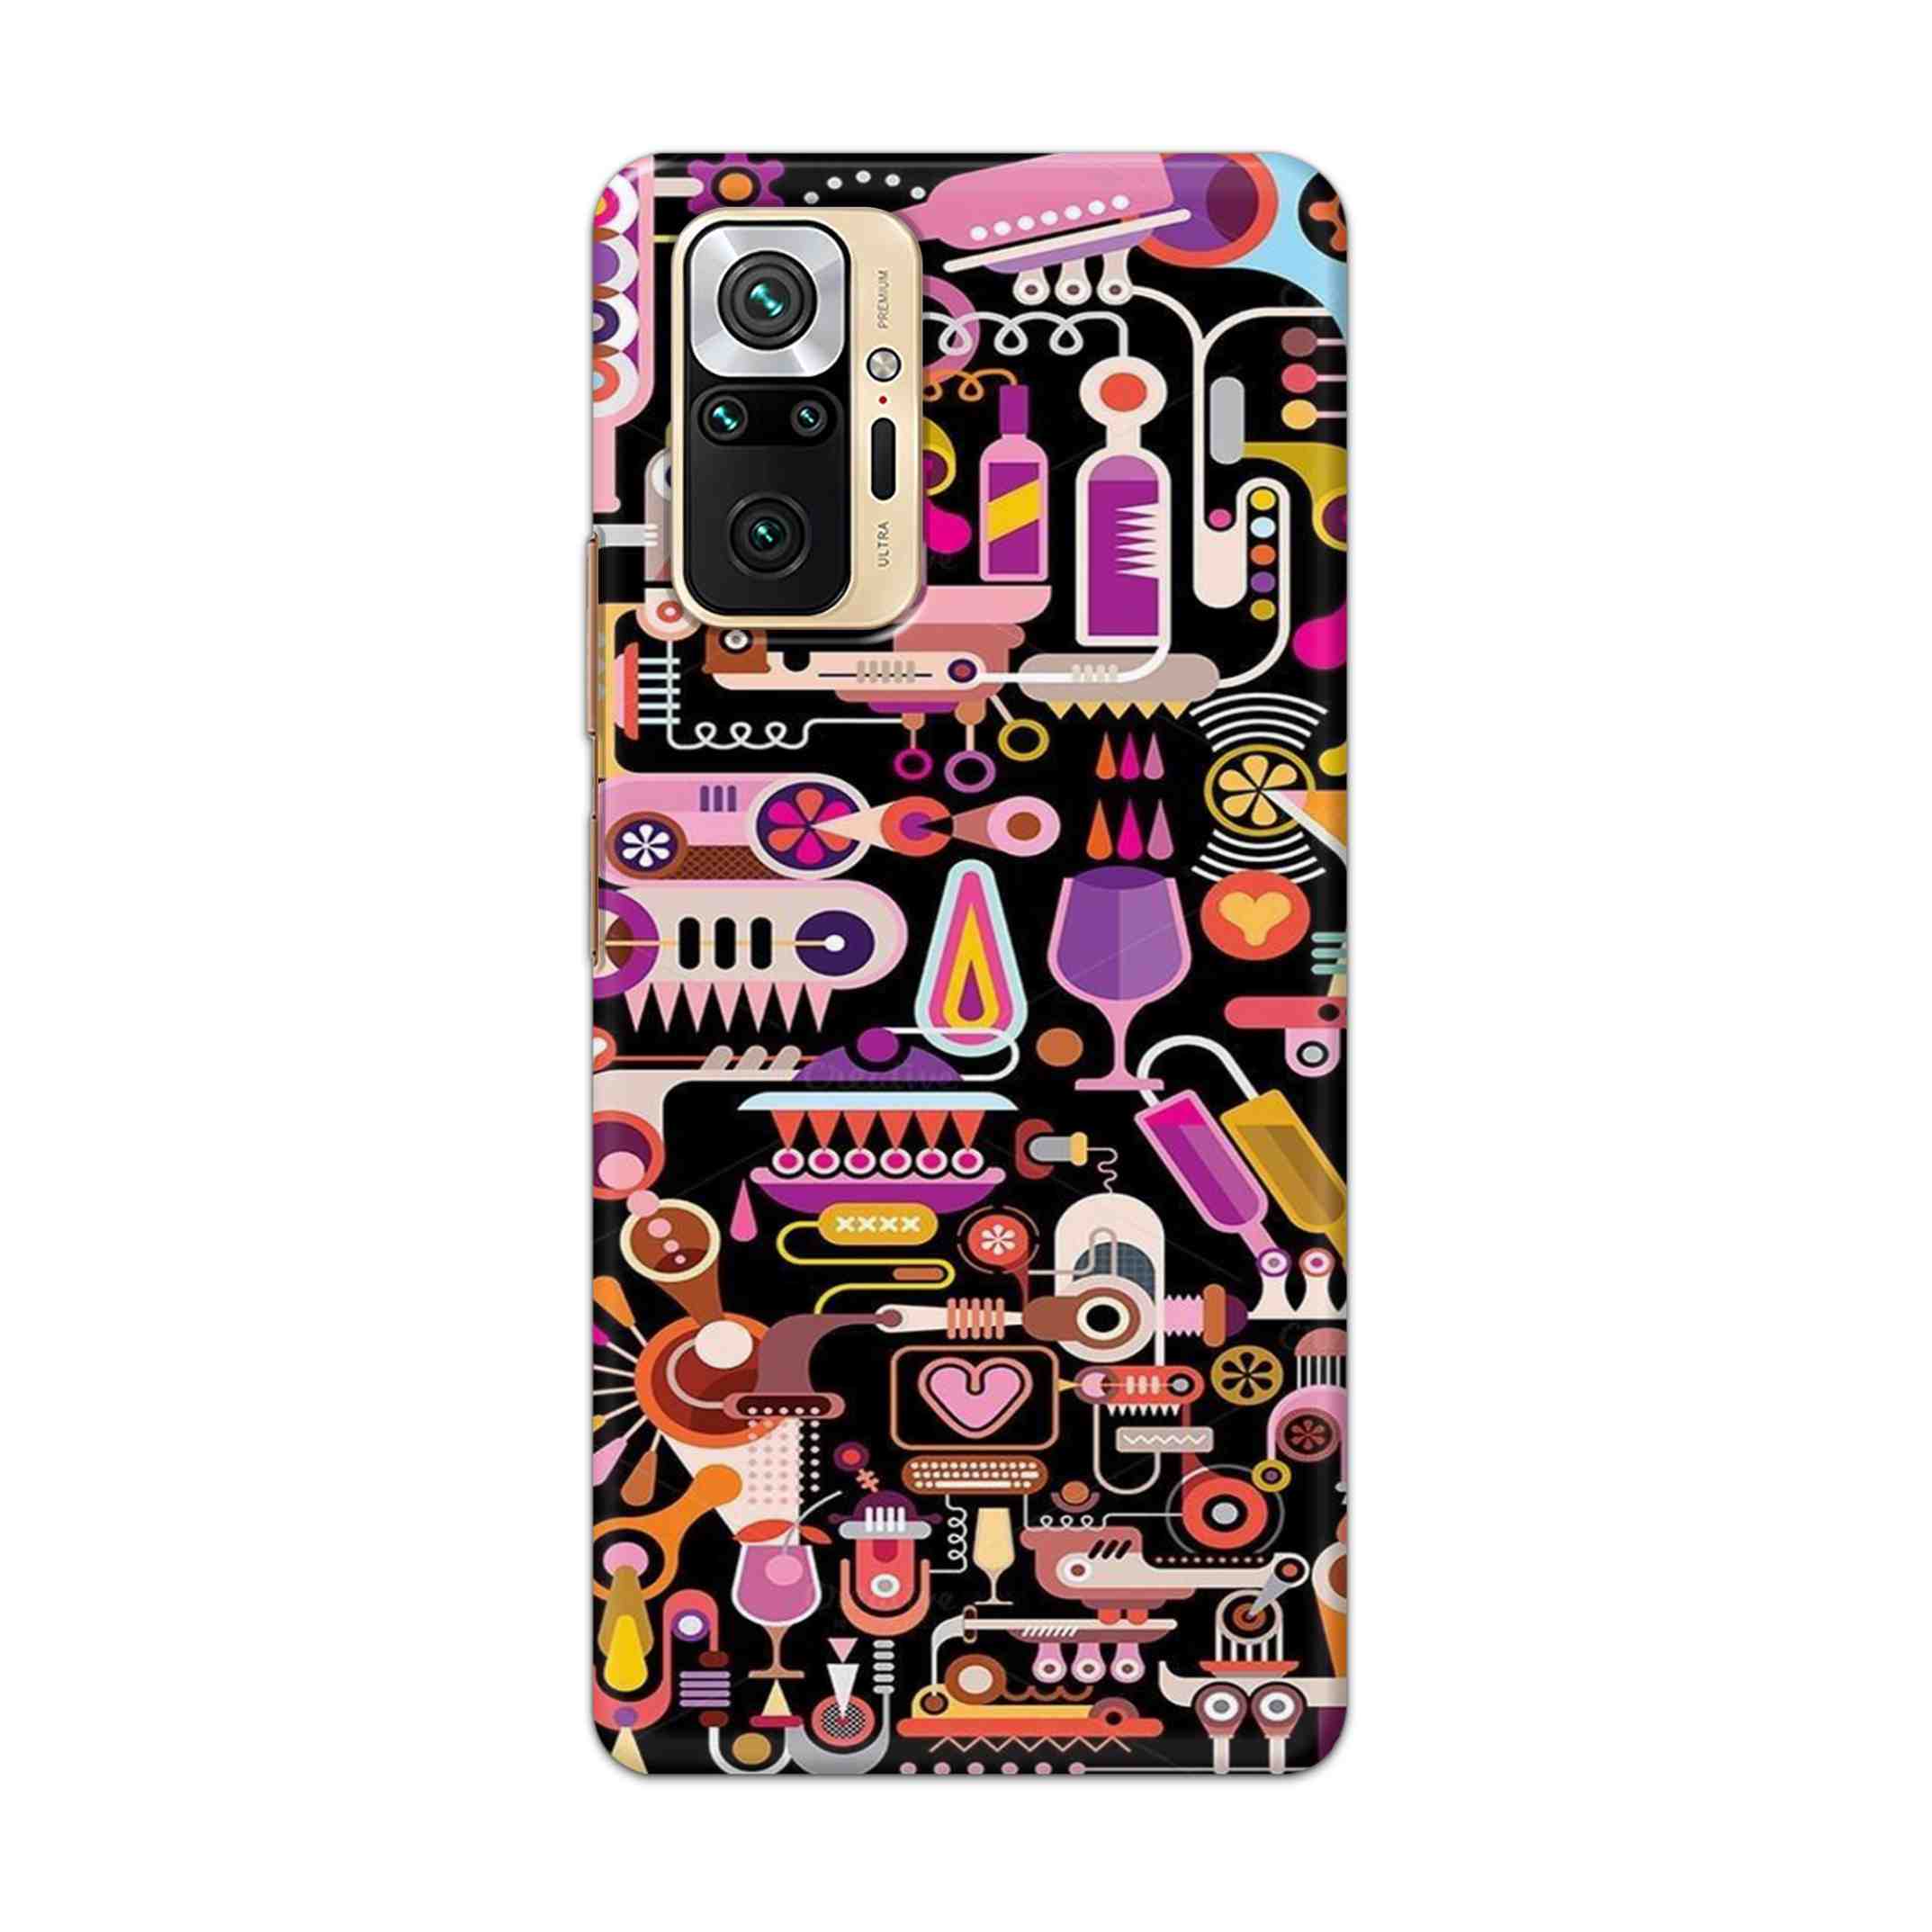 Buy Lab Art Hard Back Mobile Phone Case Cover For Redmi Note 10 Pro Max Online